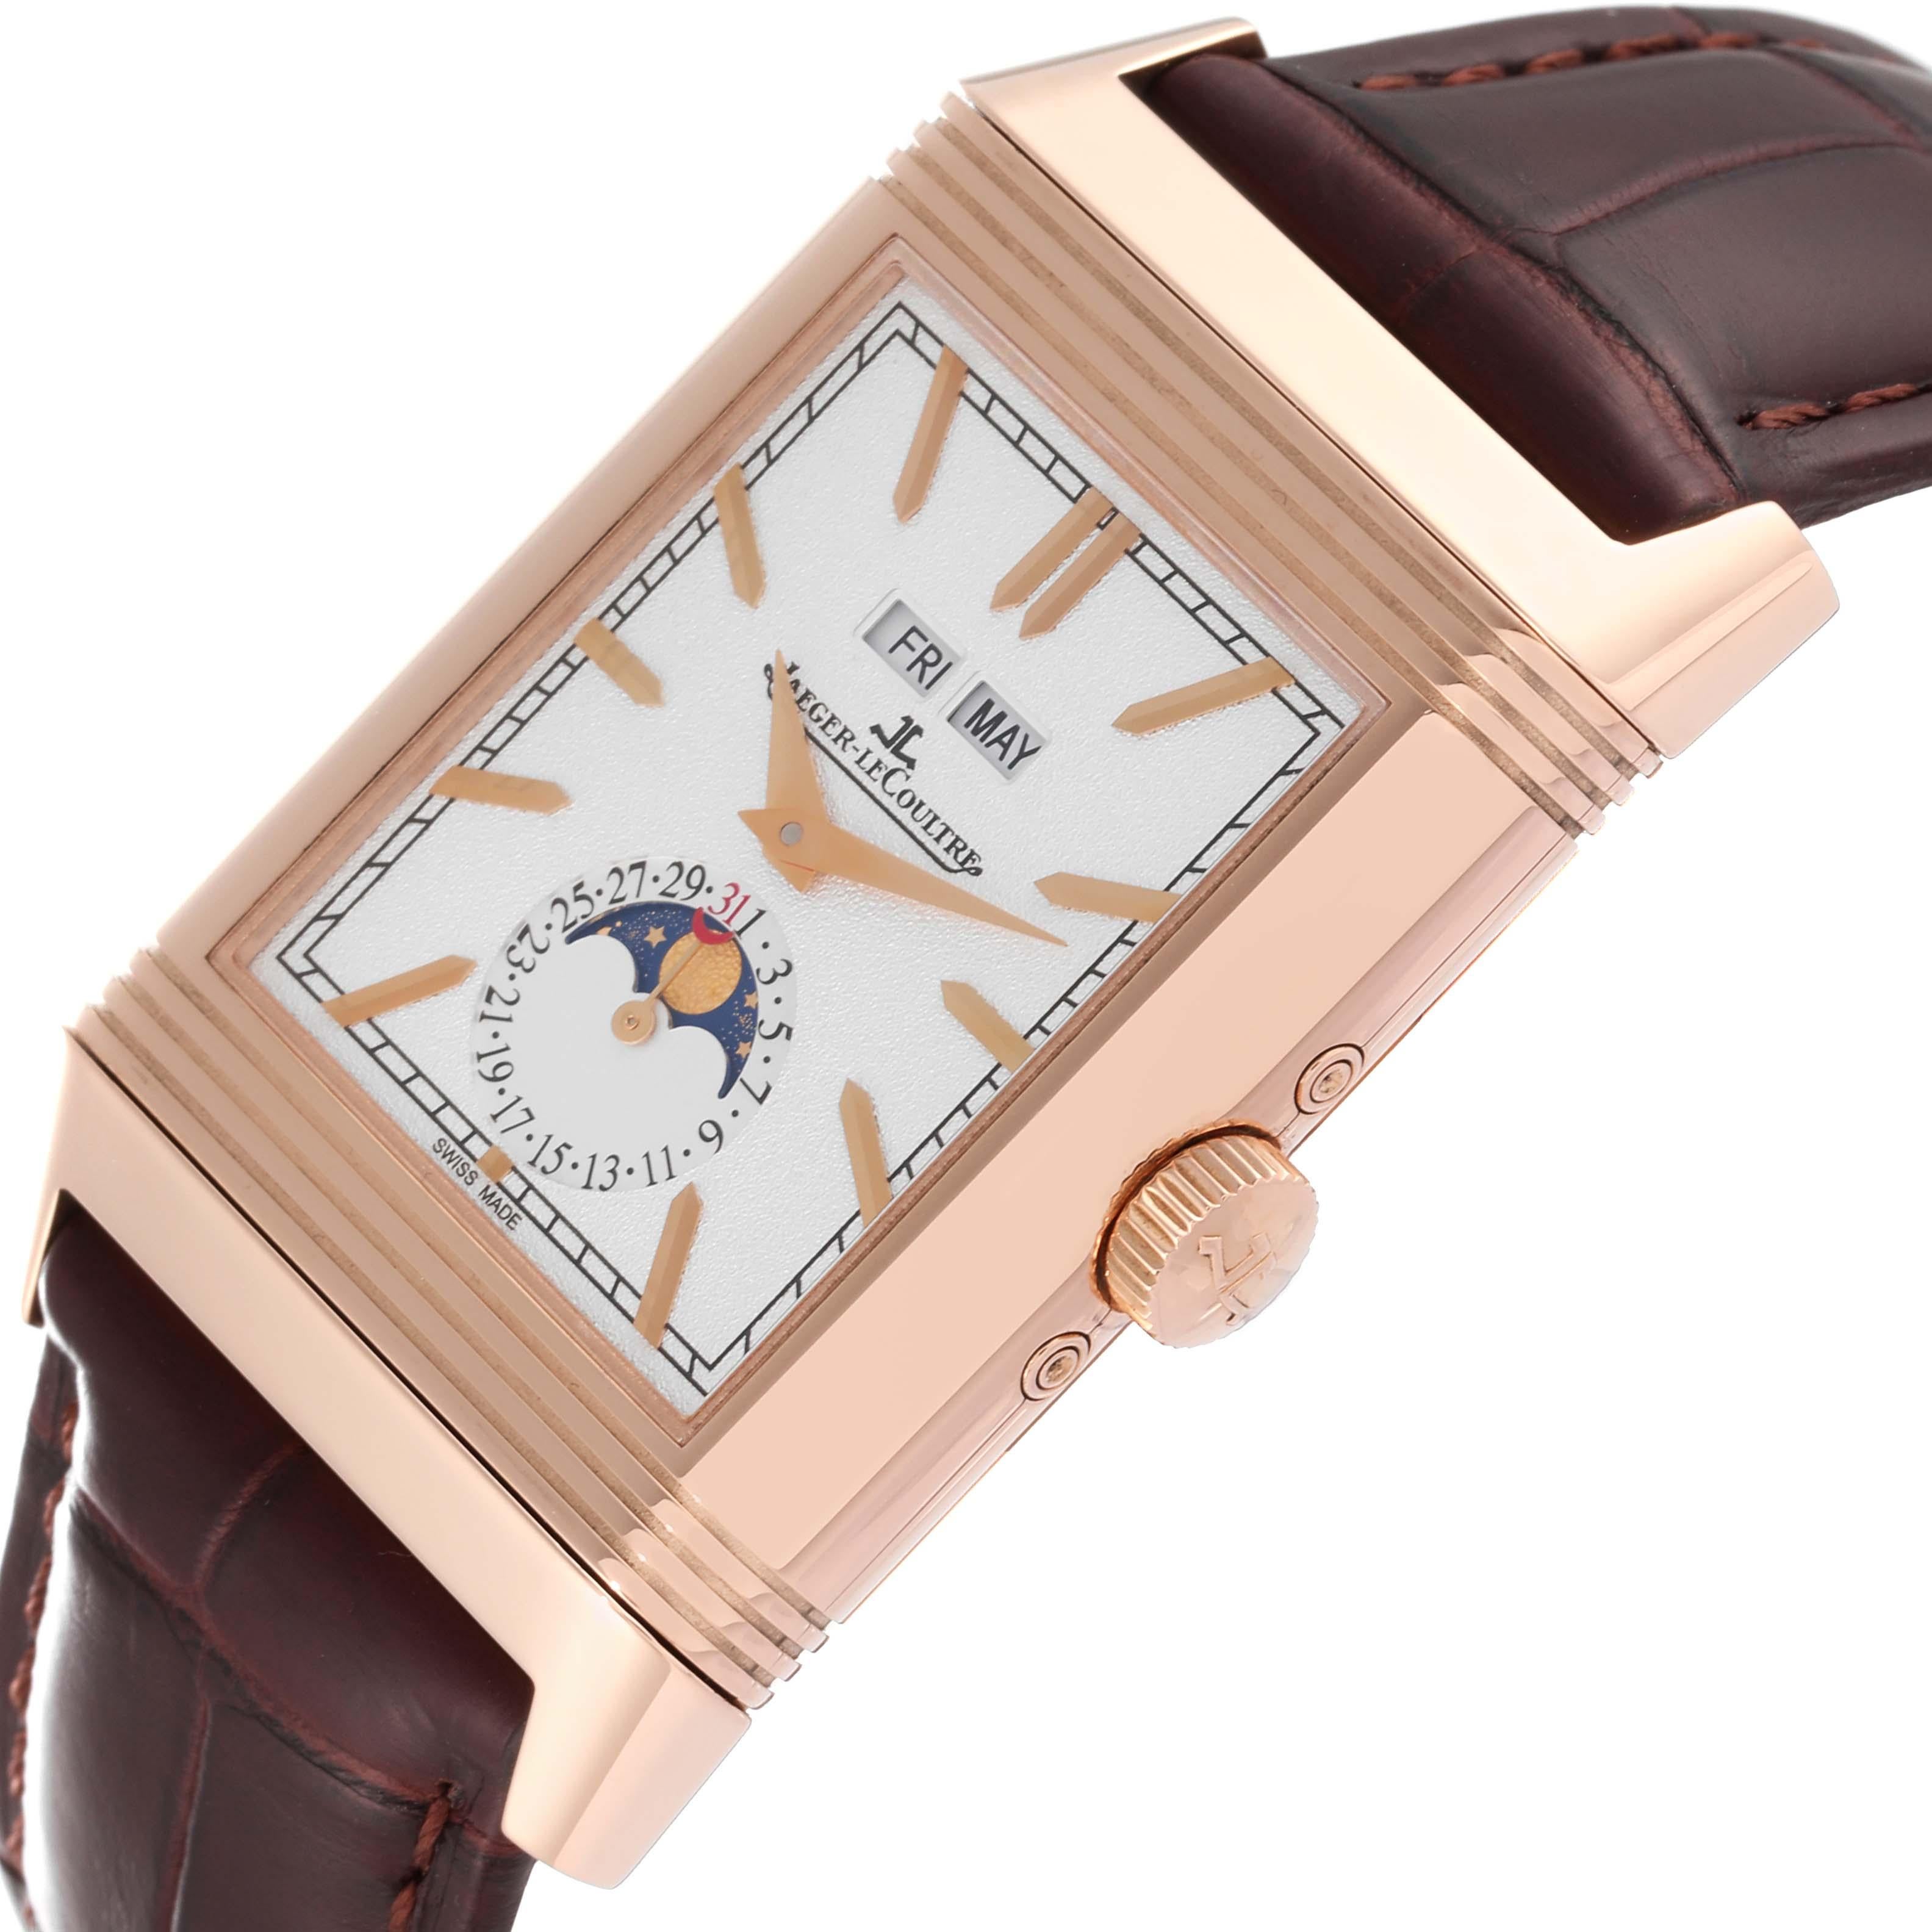 Jaeger LeCoultre Reverso Tribute Duoface Rose Gold Mens Watch Q3912420 Card 1